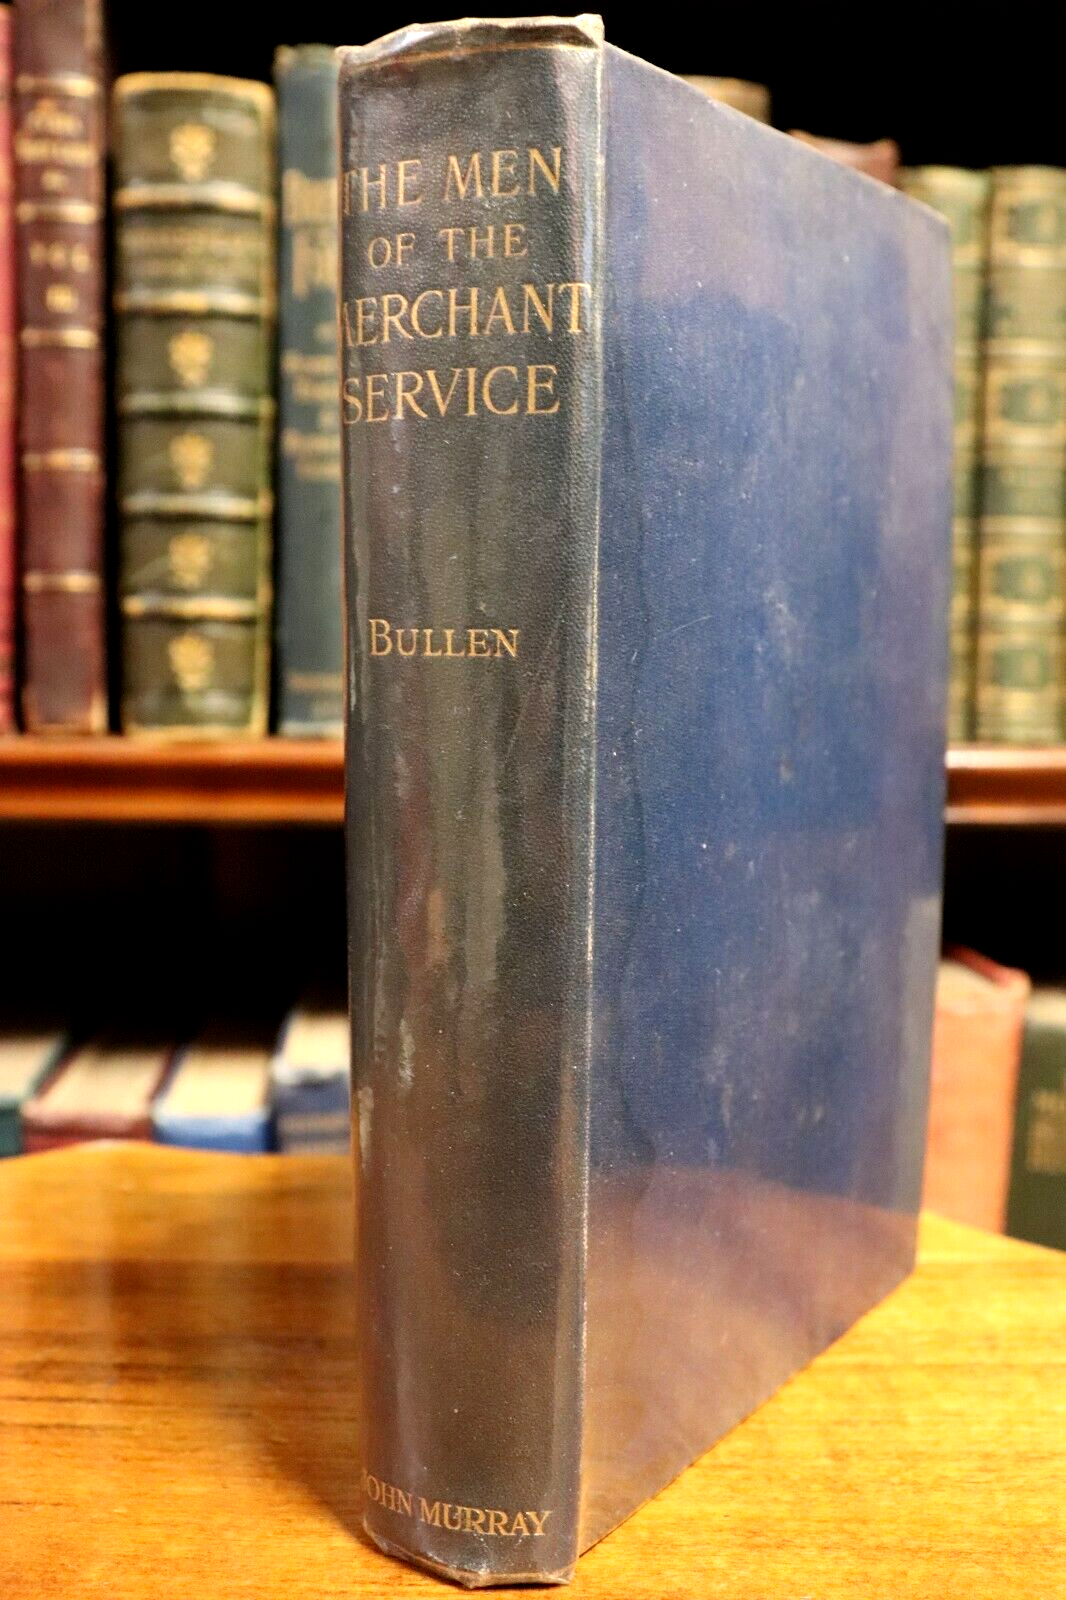 The Men Of The Merchant Service by FT Bullen - 1900 - Antique Navy Military Book